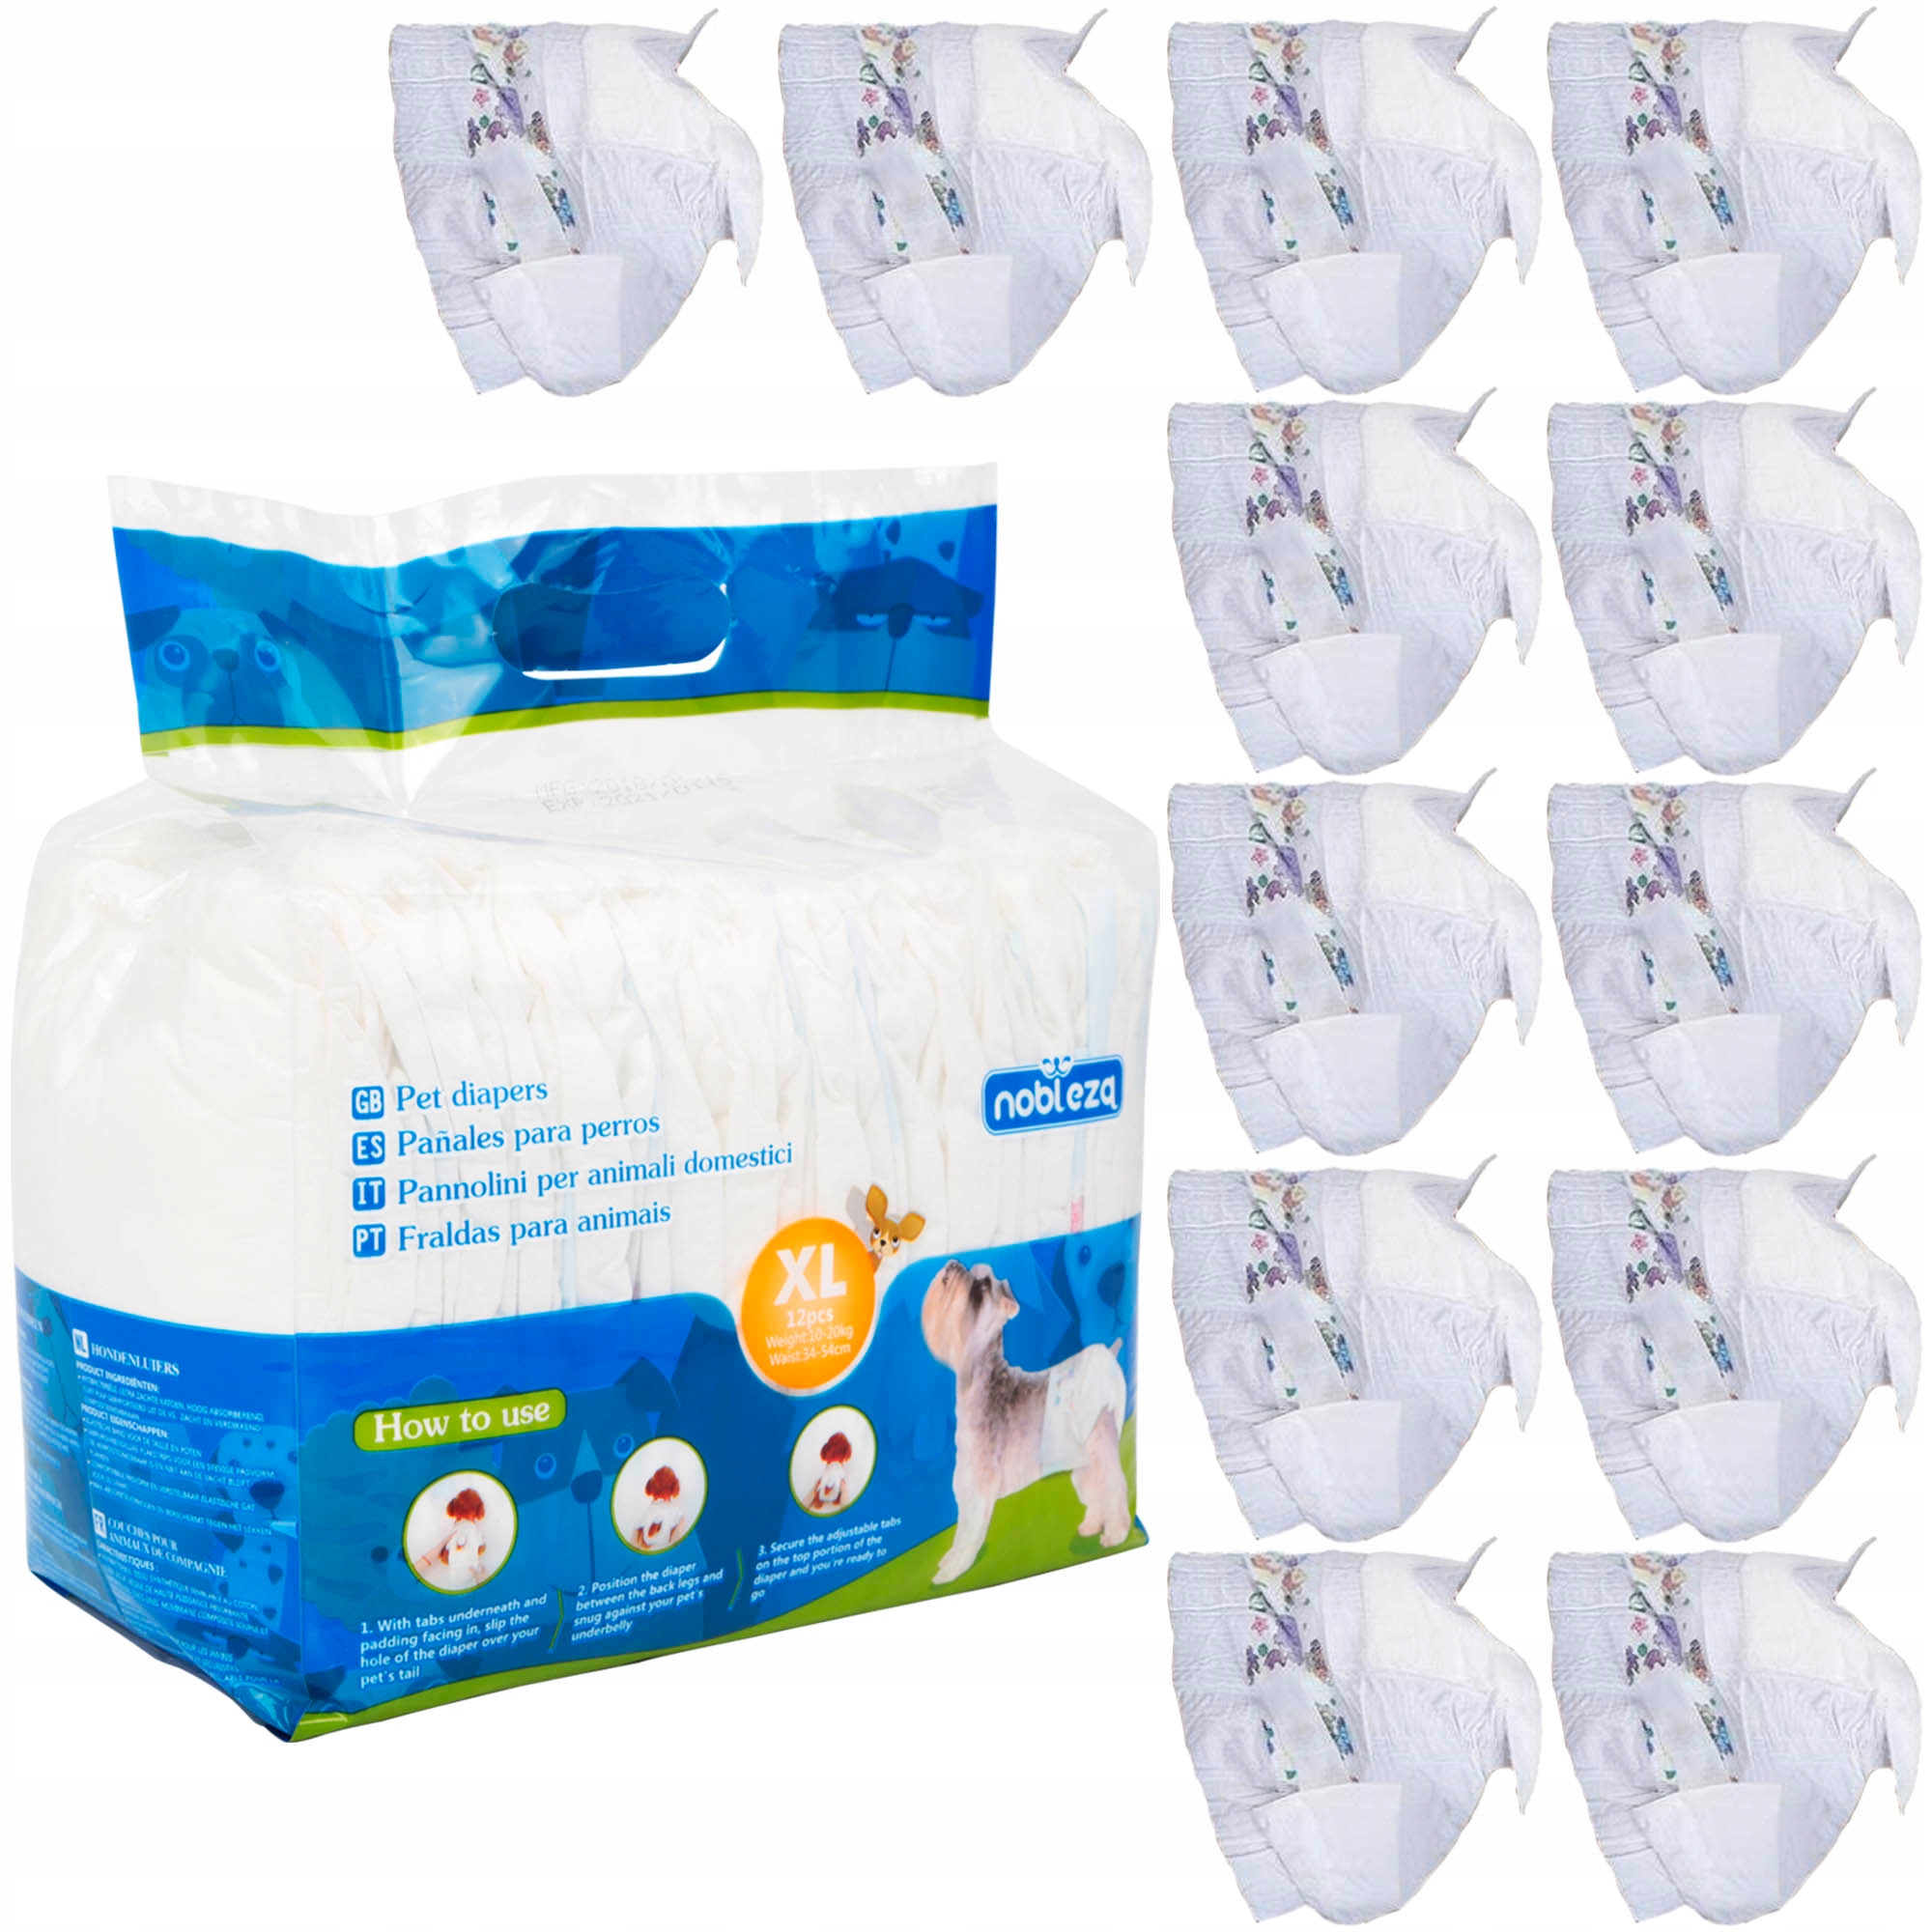 pieluchy pampers premium protection